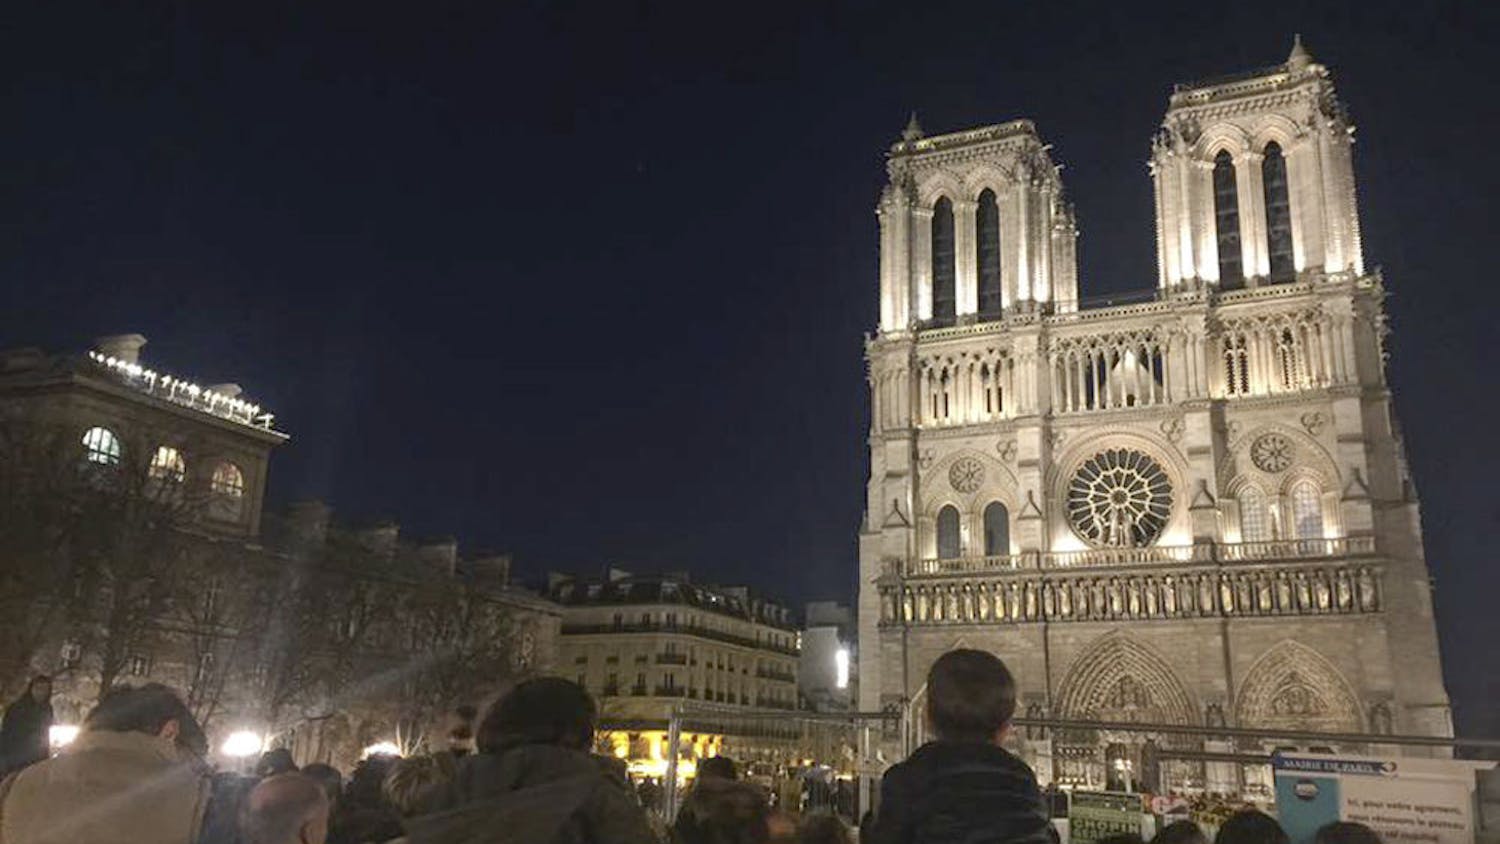 Thousands of people attended a memorial service at Notre Dame Cathedral in Paris on Nov. 15, 2015. Children sat on their parents' shoulders and old ladies stood outside the church, watching the service live-streamed on their phones. "It was a very impactful moment," said Pedro Perez, a 20-year-old UF history and political science junior studying abroad in France, who took the photo.